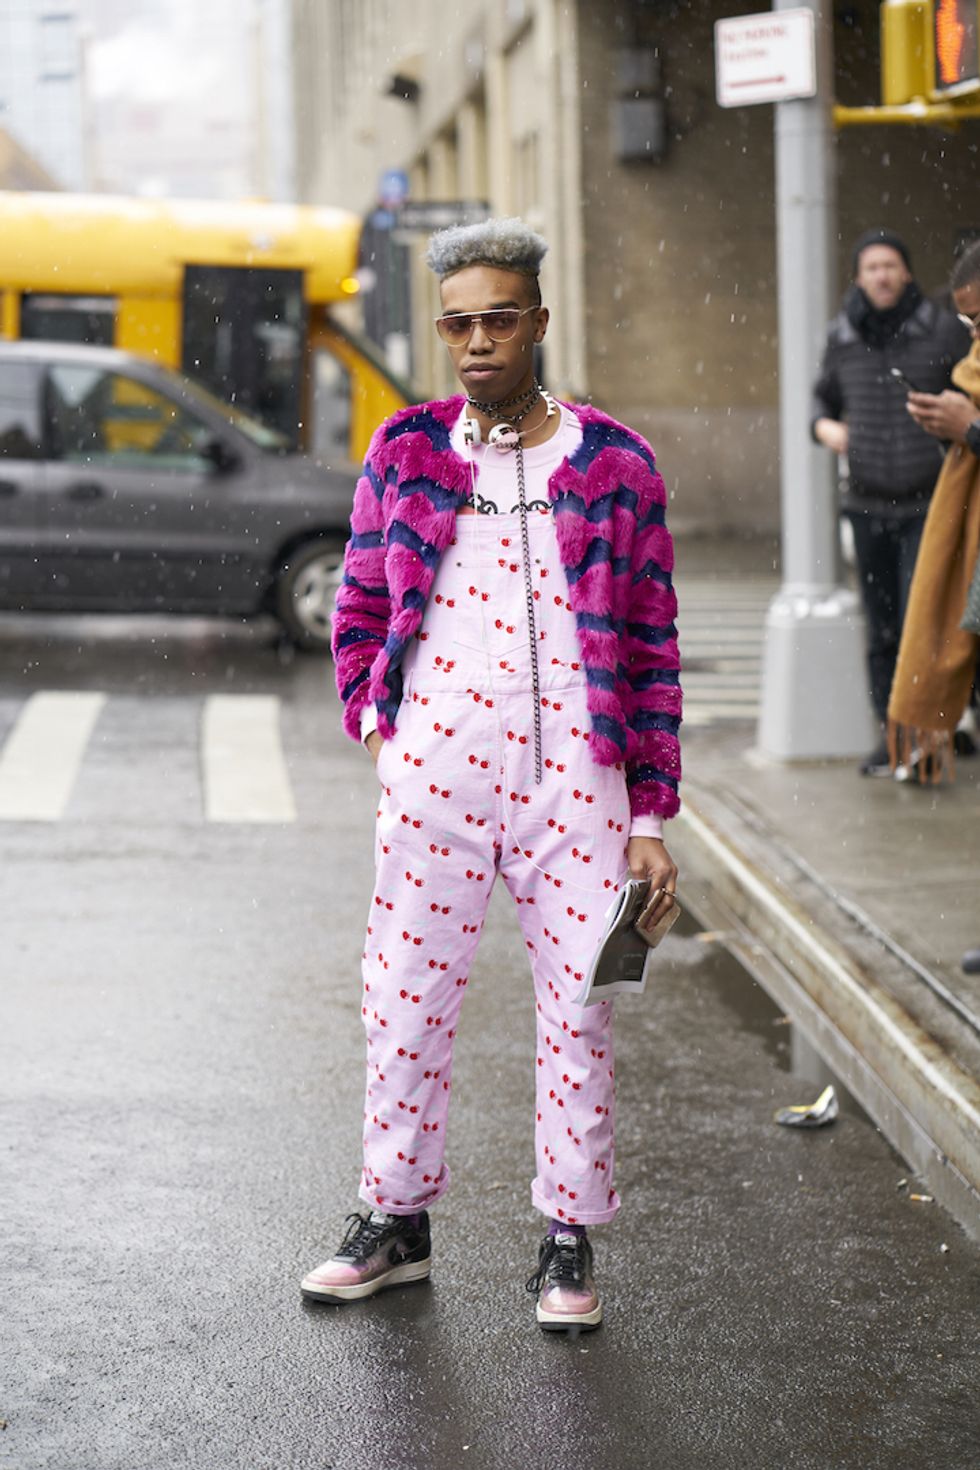 Meet the Men's Street-Style Star Whose Fashion Delivers a Powerful